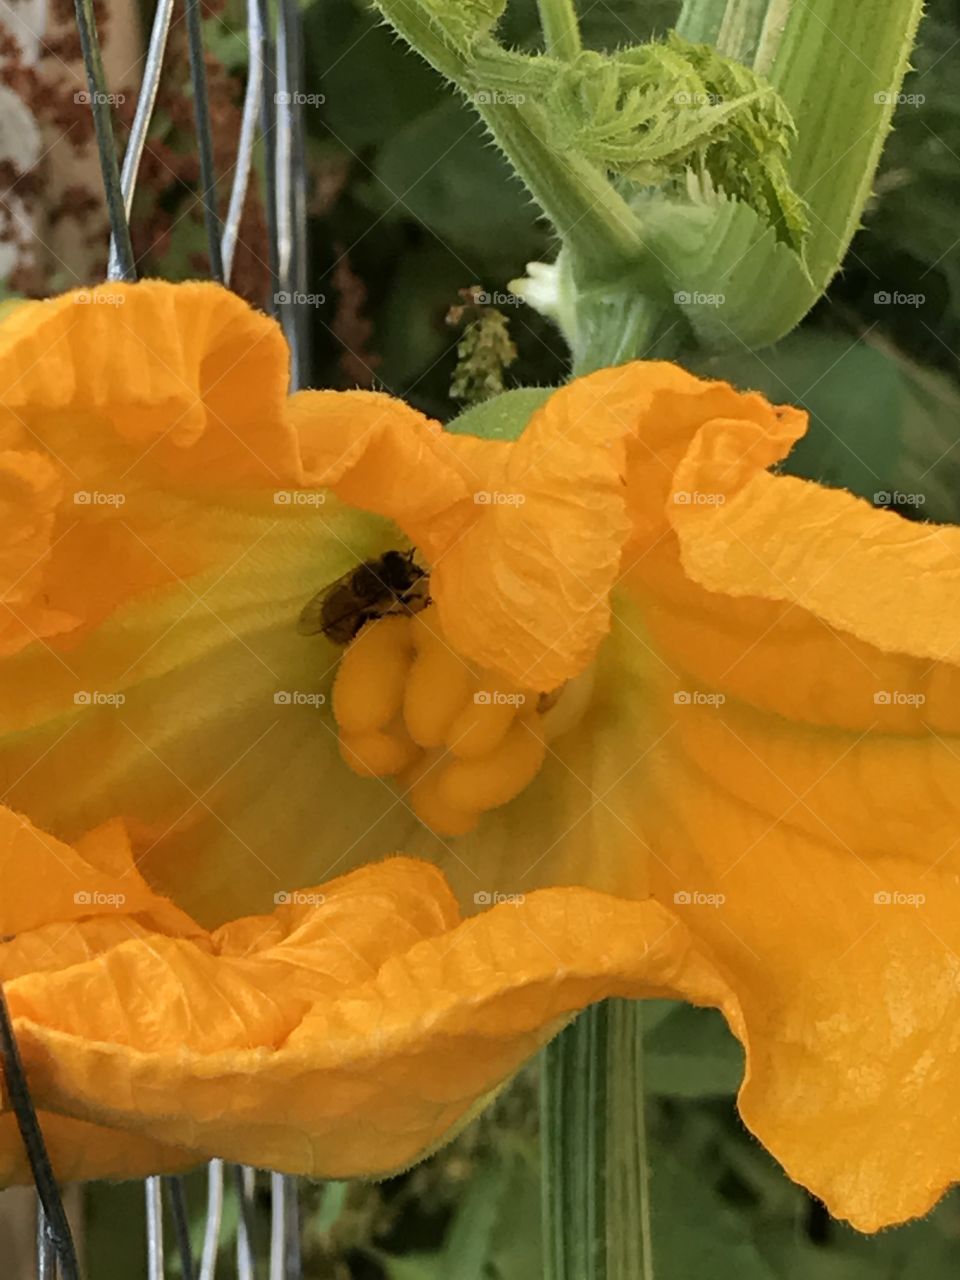 Honey bee hiding in a bright yellow squash blossom while gathering pollen on a summer day